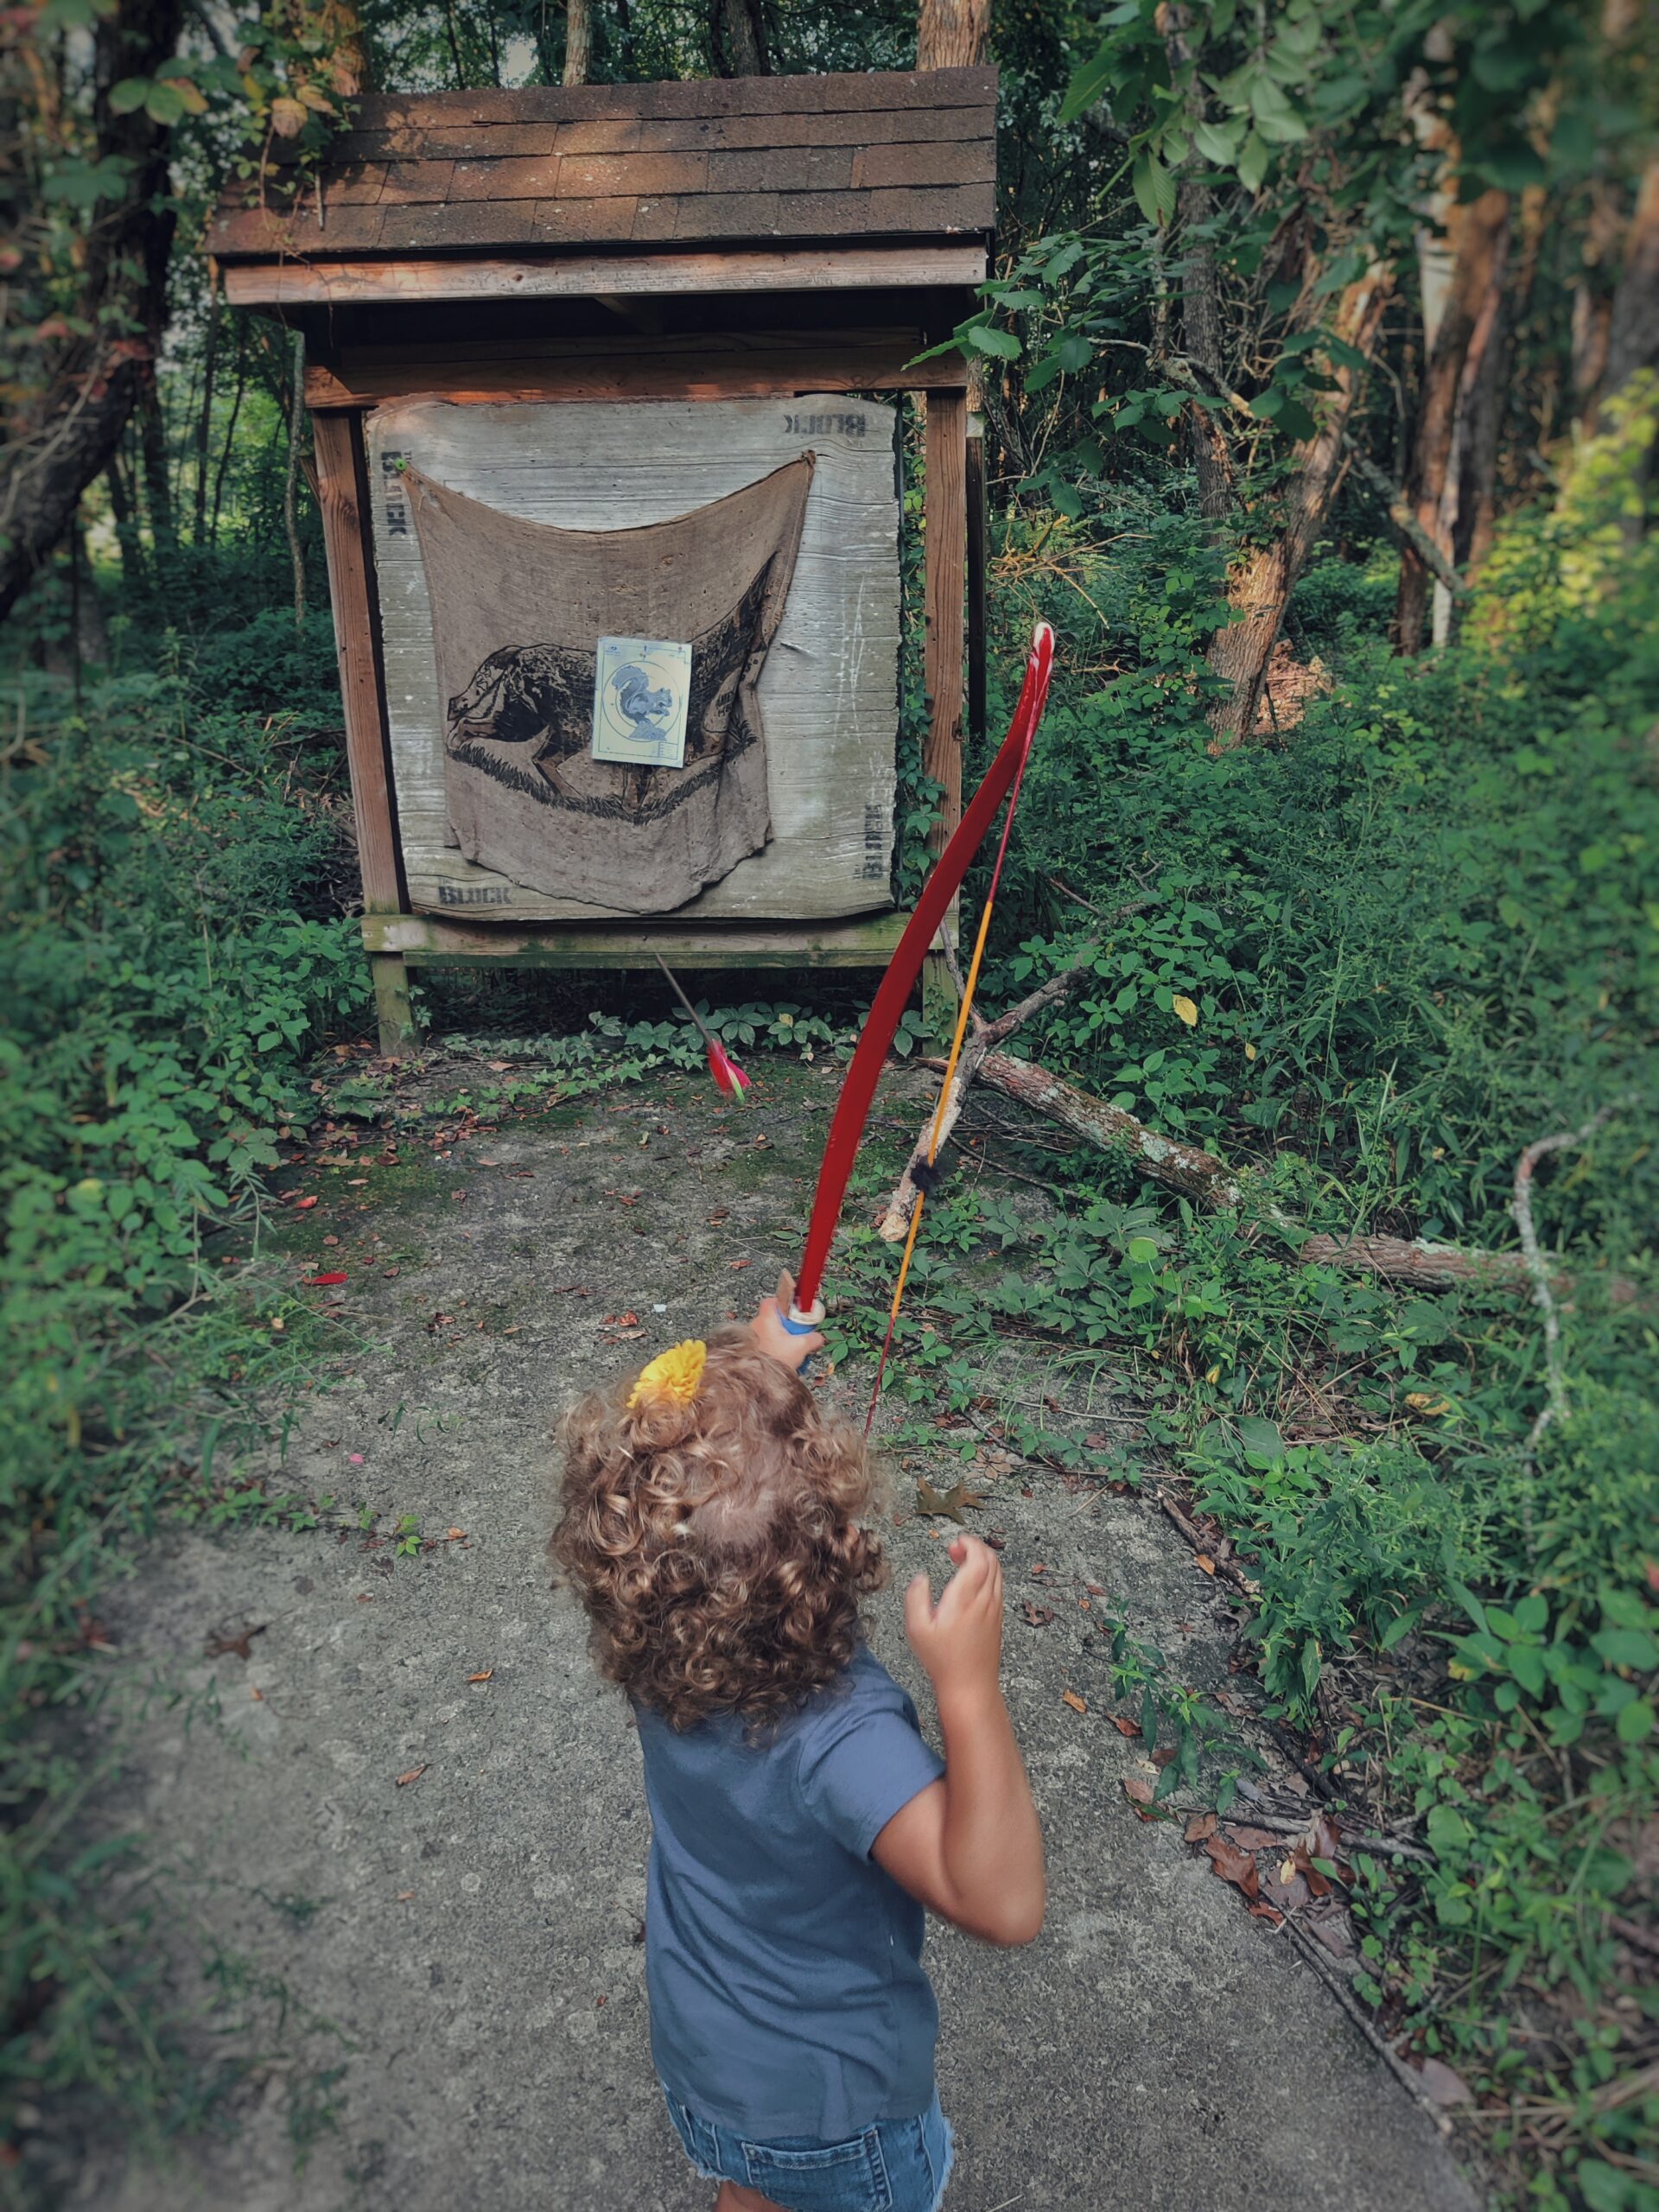 Teaching kids archery doesn't have to start at a certain age—just when they're ready.